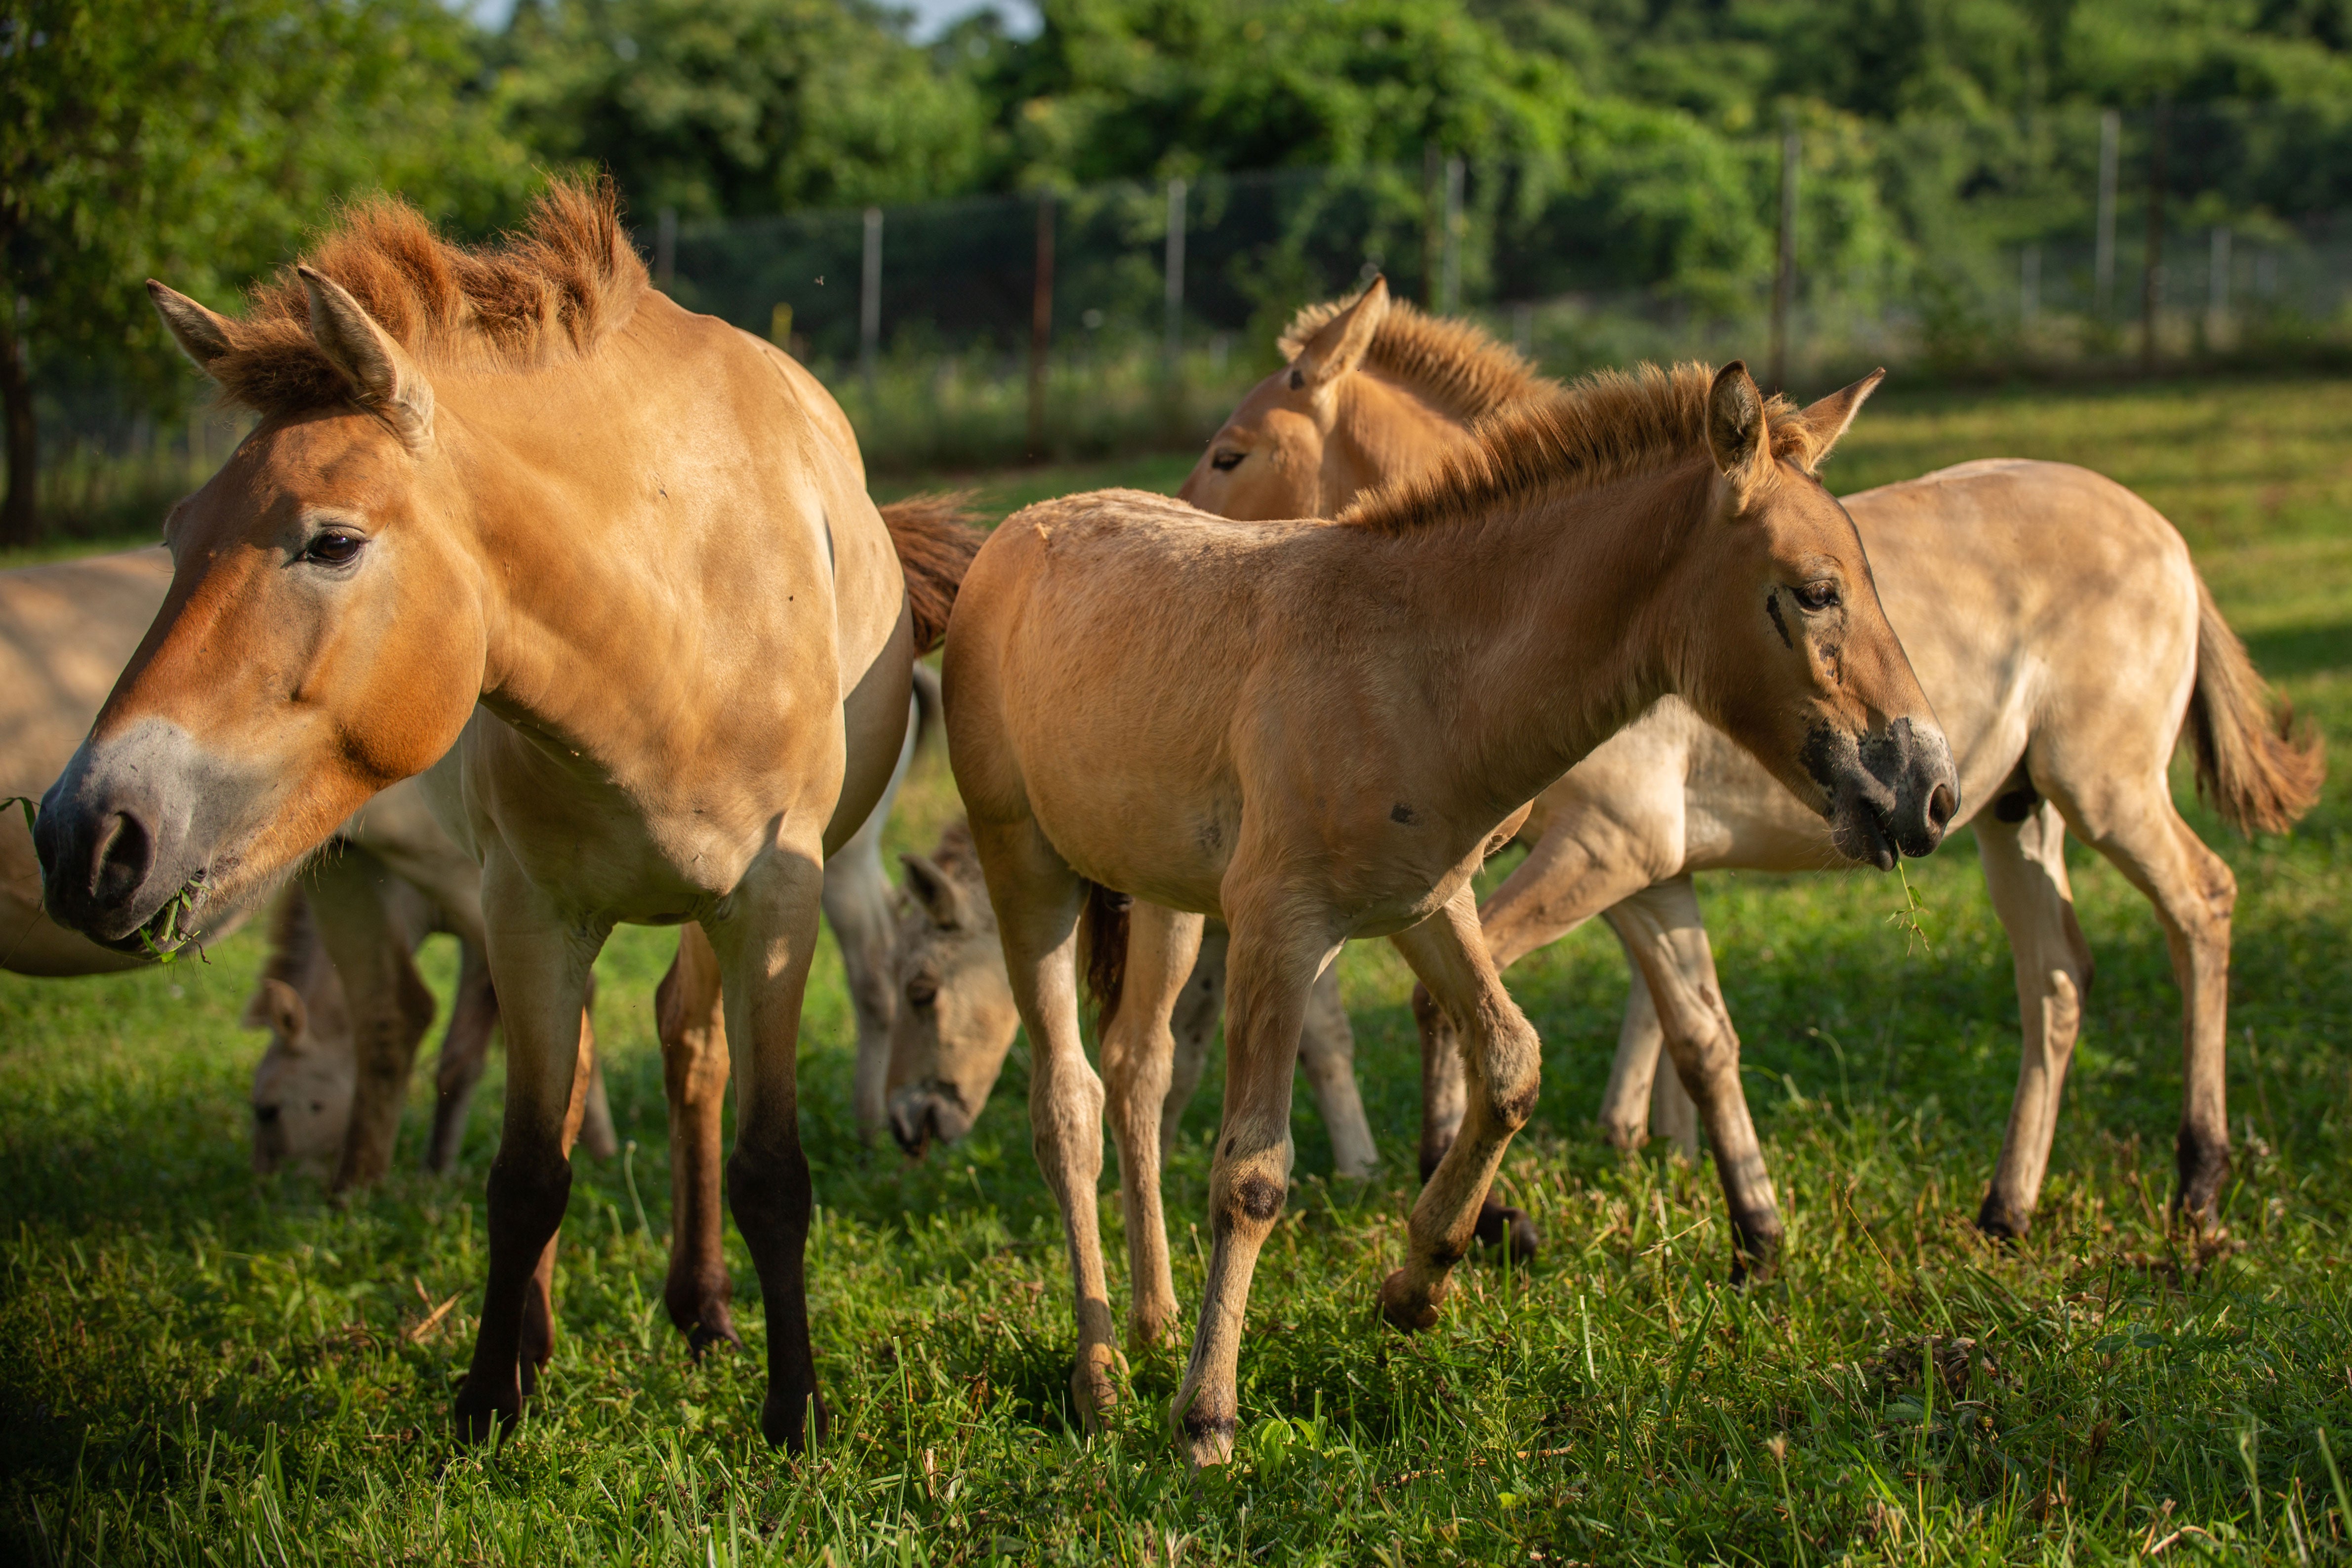 A group of Przewalski's horse foals and one mare standing in the grass with trees in the background